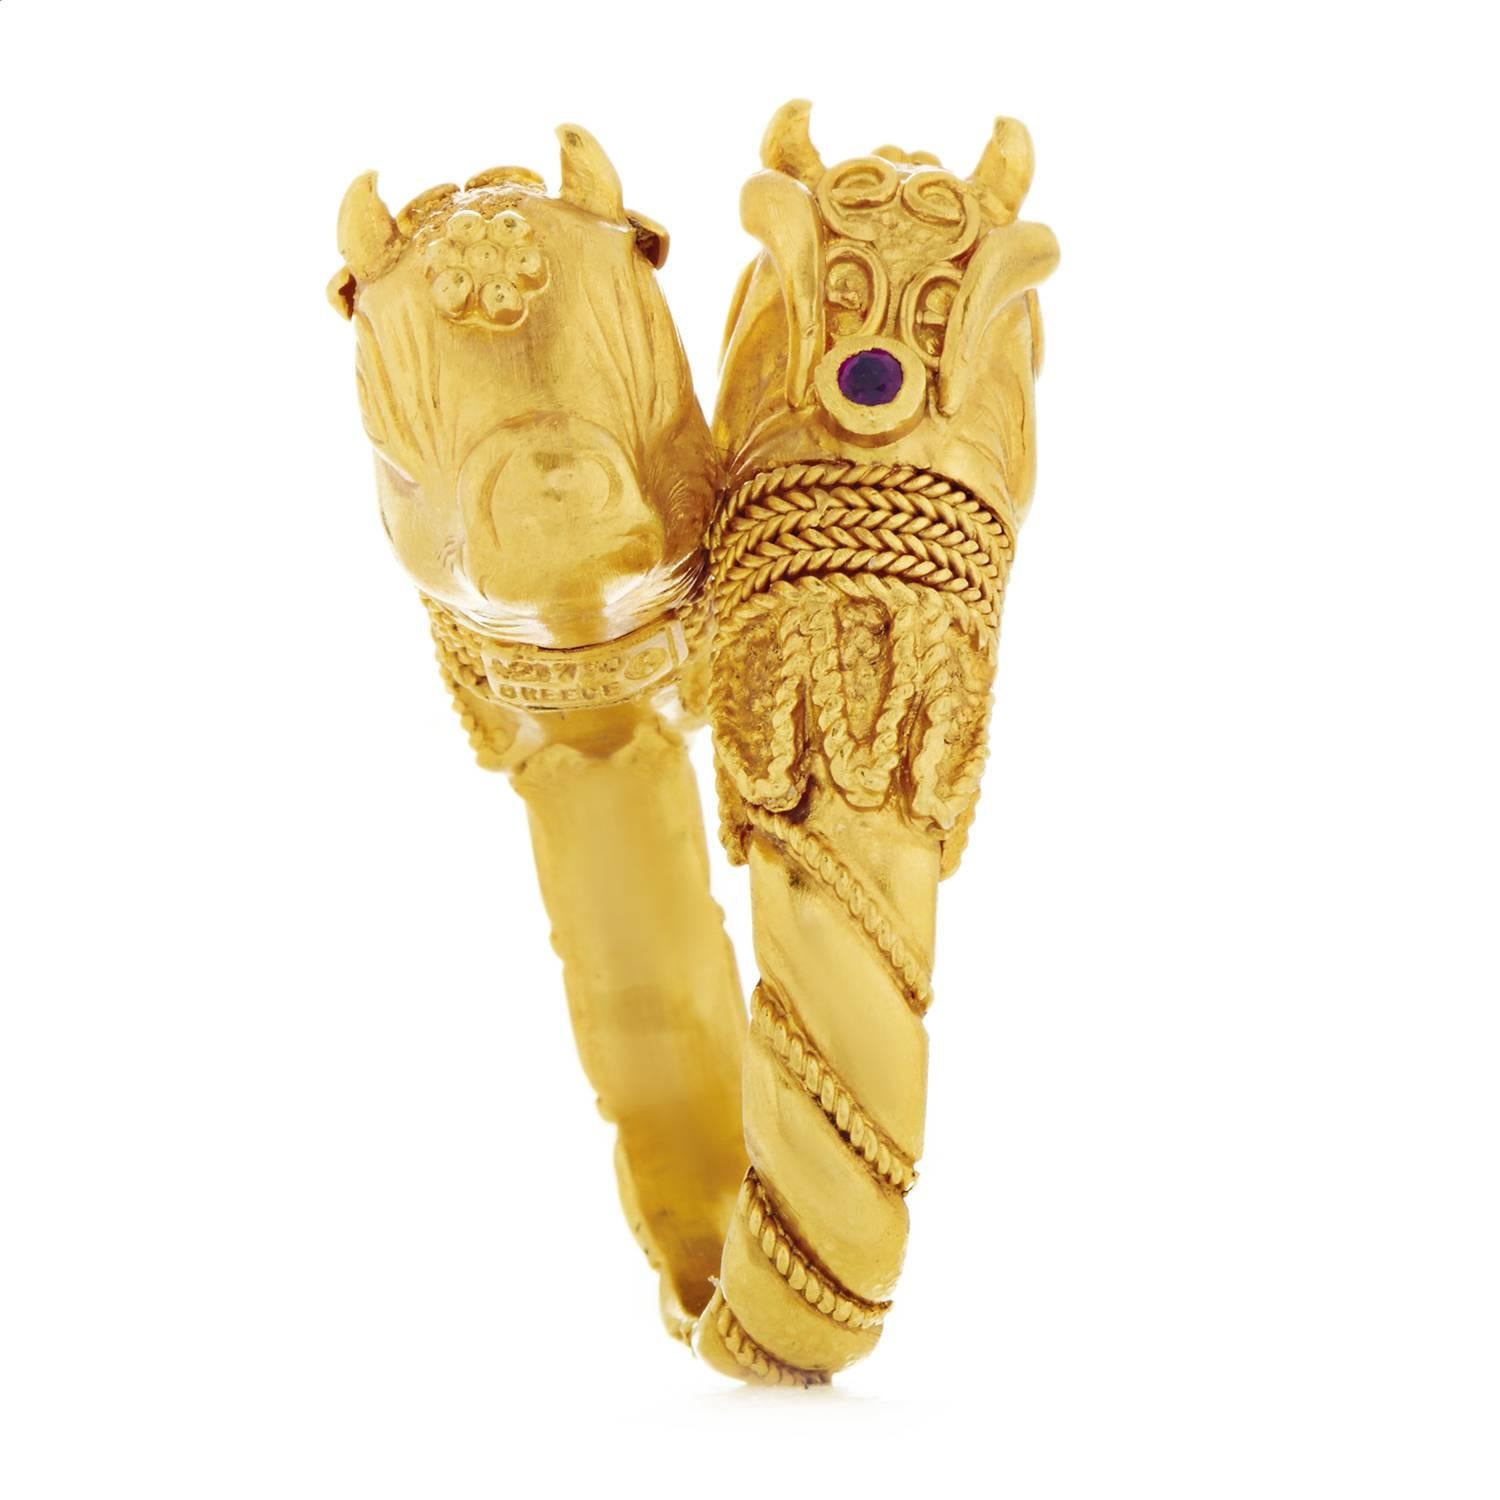 Wonderfully ornate and amazingly intricate, this exceptional ring from Ilias Lalaounis boasts lavish décor upon the entire 18K yellow gold body as well as the gorgeous depictions of animals at the top, while adorned with two striking rubies for a